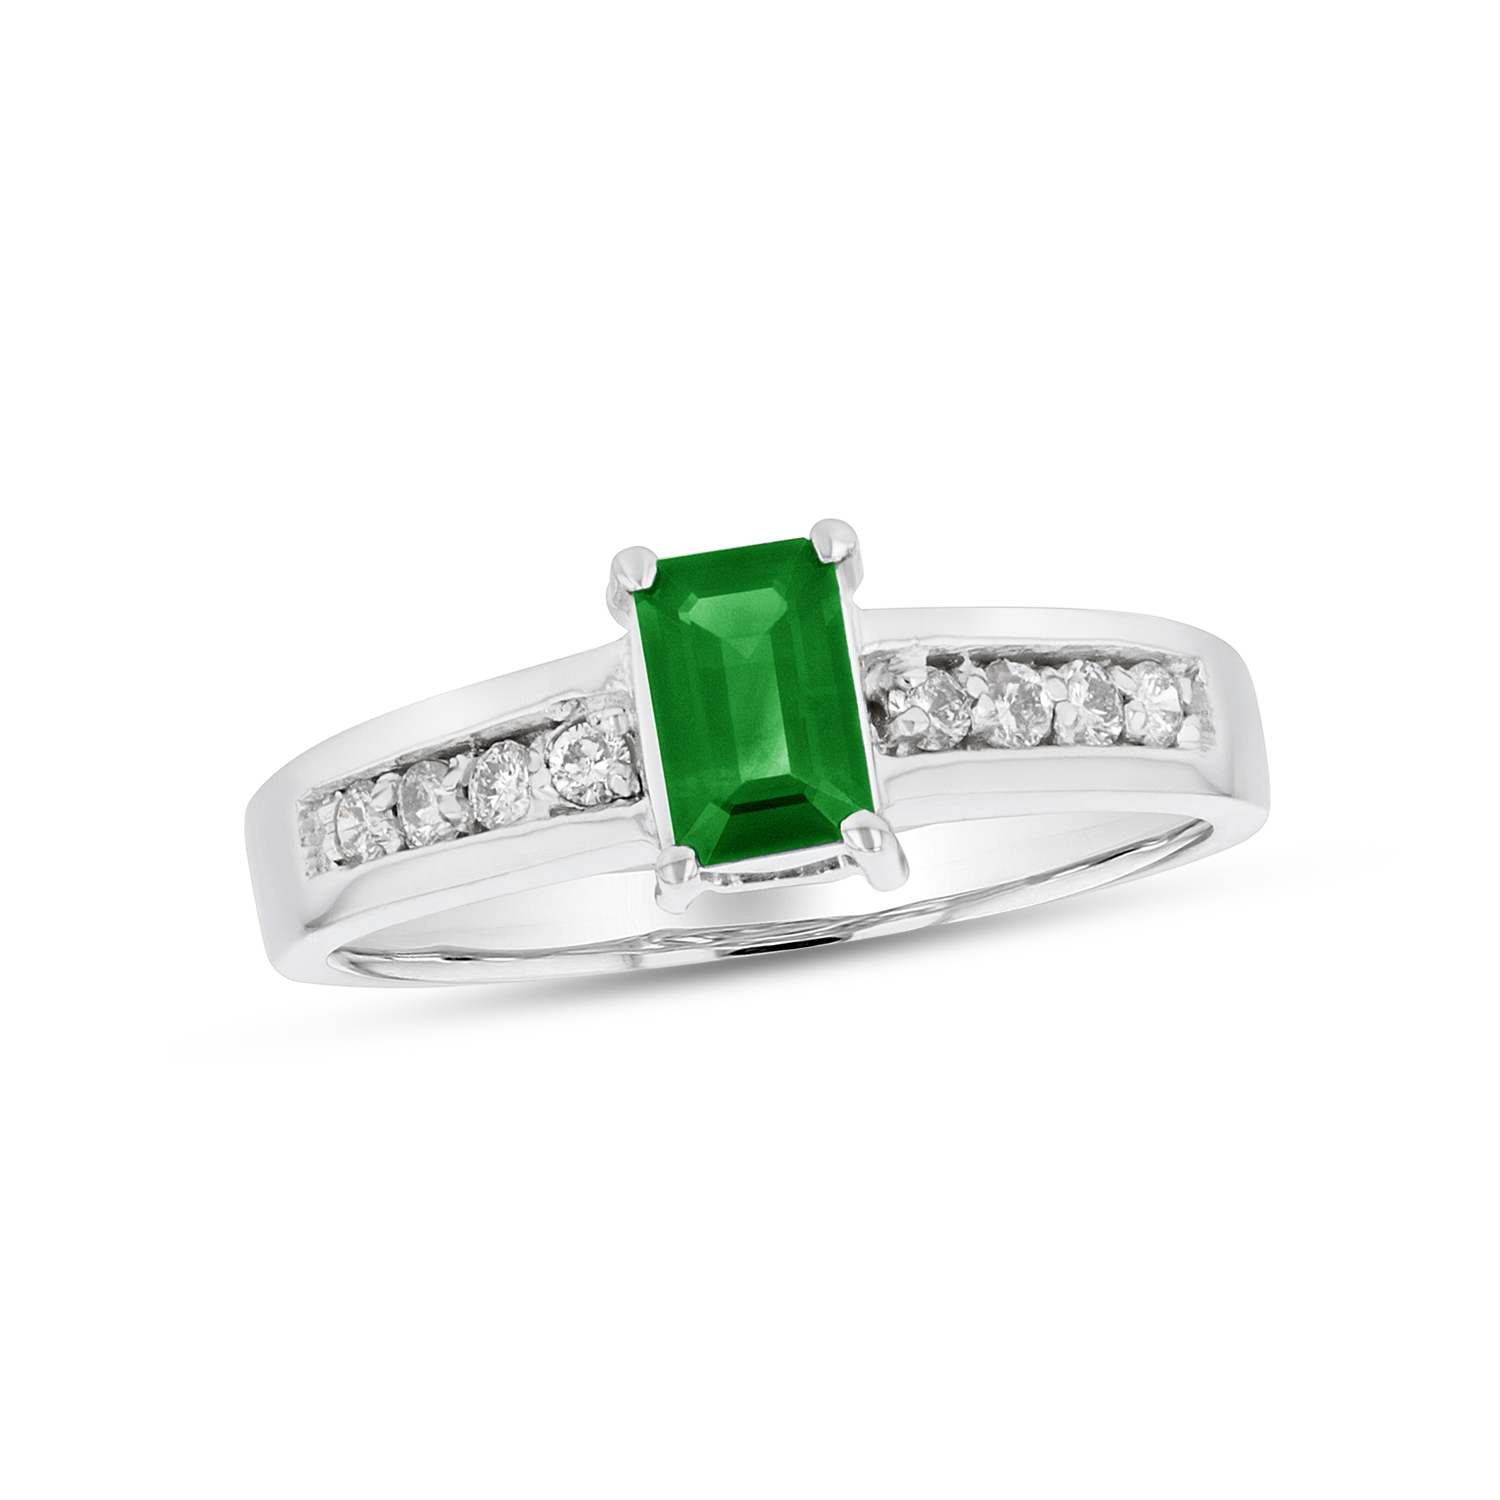 View 0.70ctw Diamond and Emerald Ring in 14k White Gold